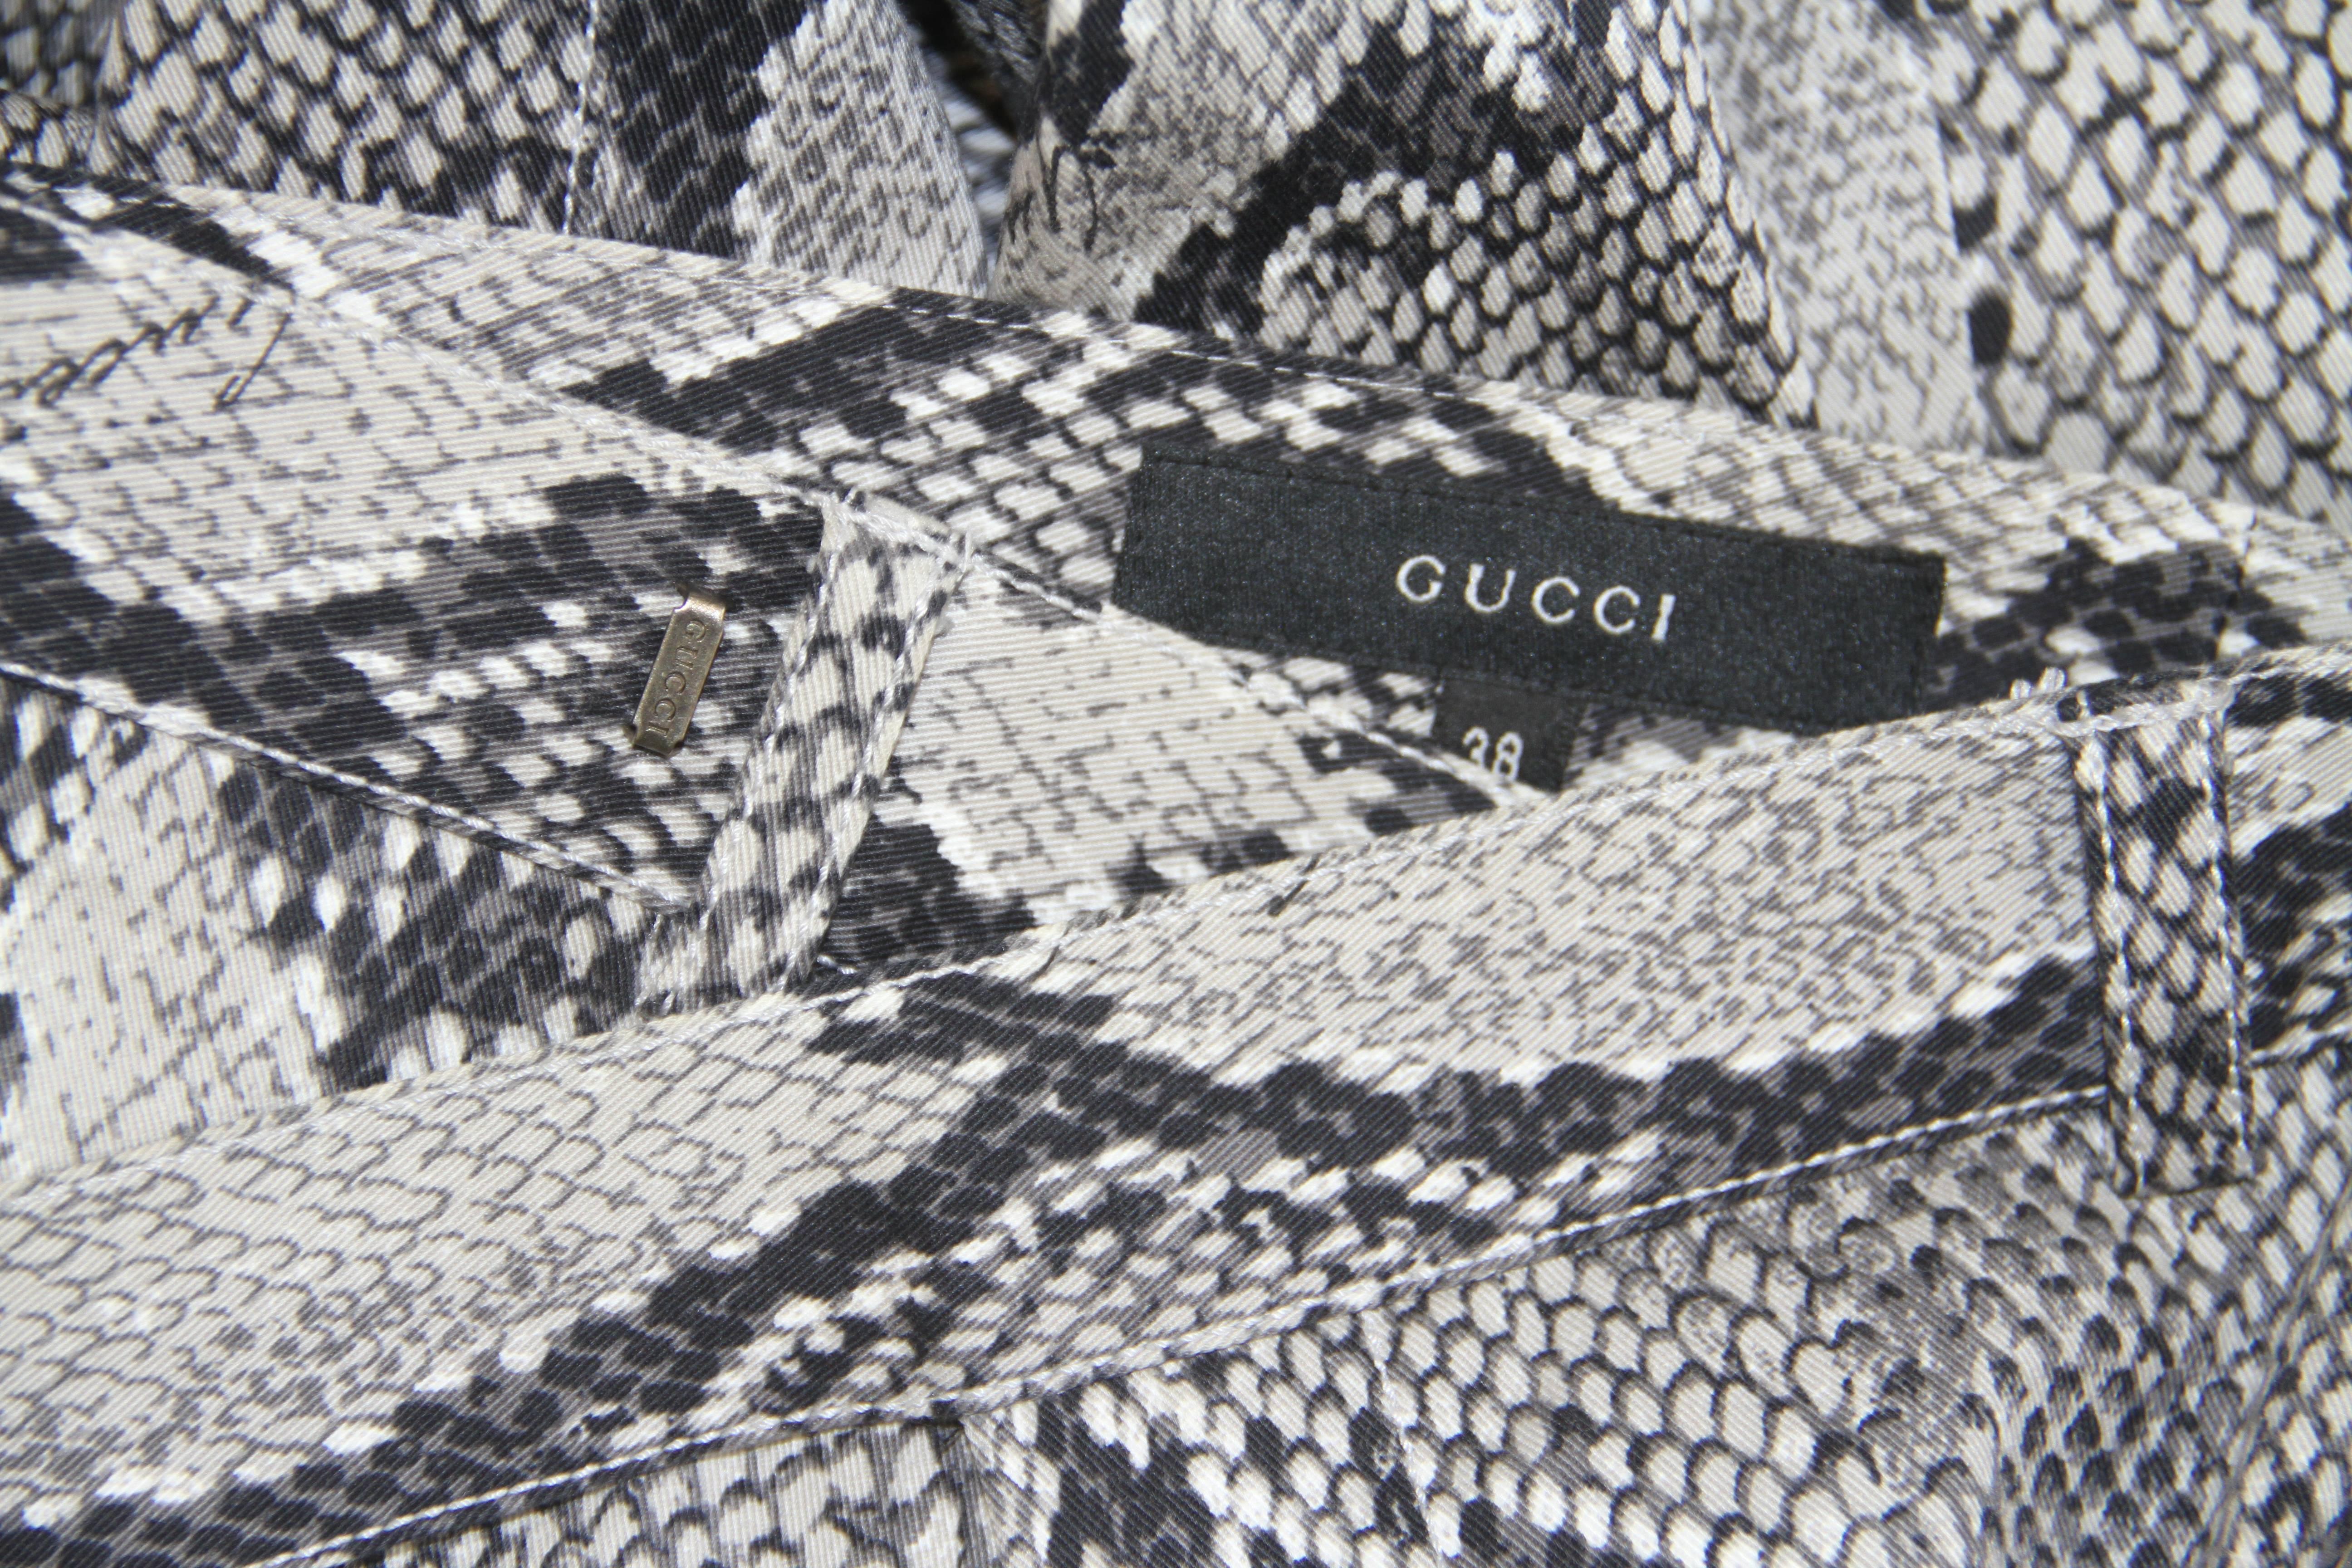 Iconic Tom Ford for Gucci python print ensemble from the Spring 2000 collection.

The top is marked an Italian size 40 and the pants are marked an Italian size 38.

Manufacturer - Zamasport S.p.a.

Fabric content - top - 100% rayon / pants -